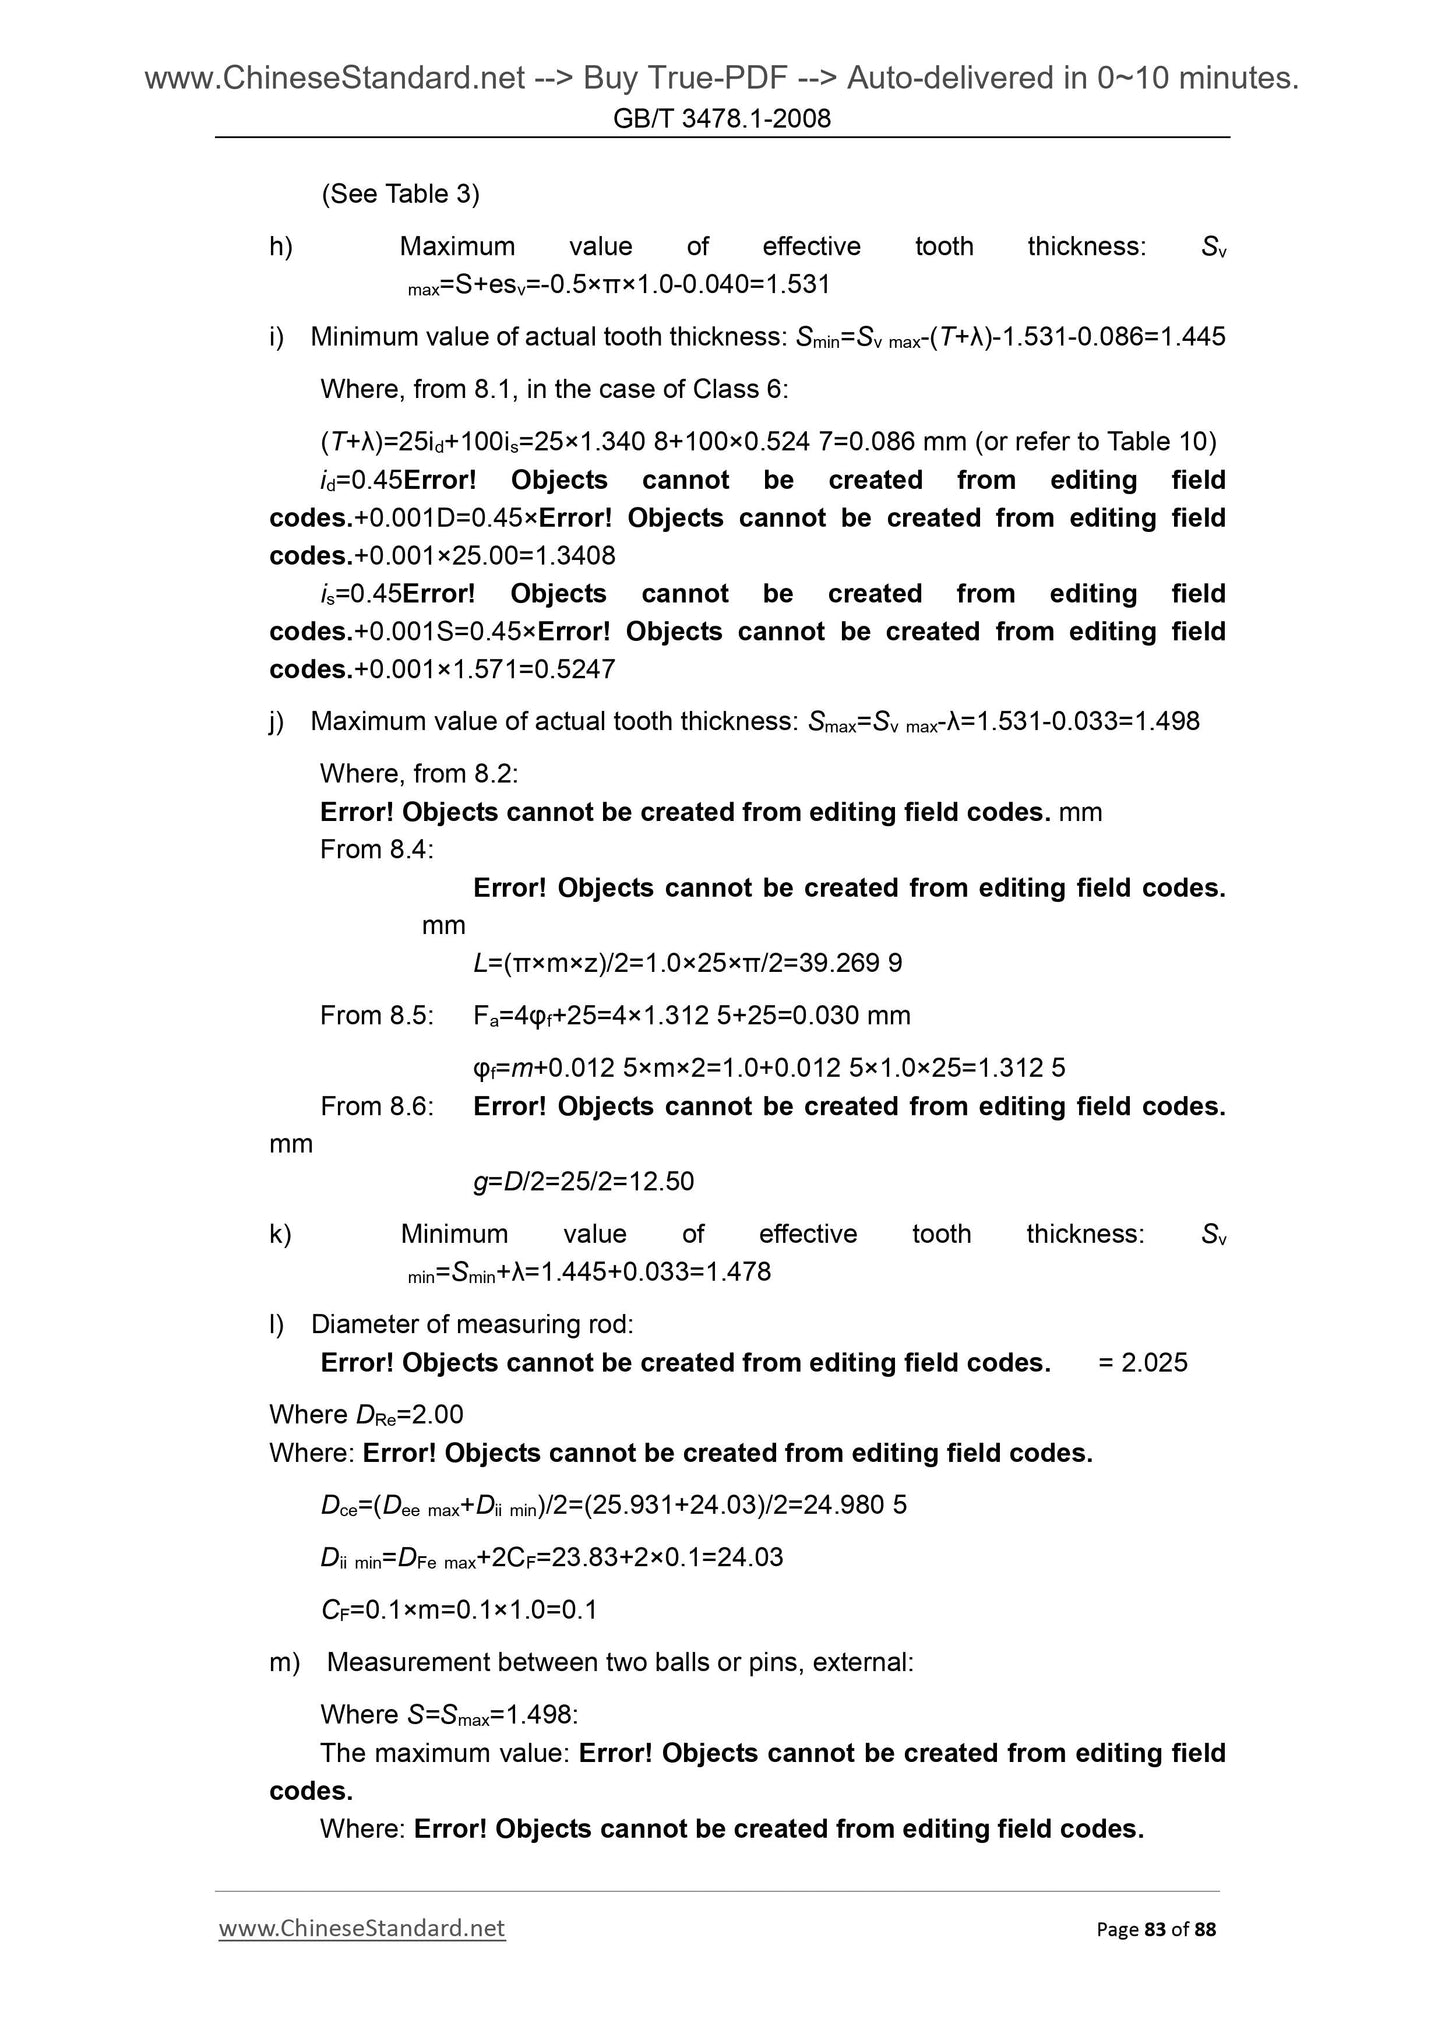 GB/T 3478.1-2008 Page 11